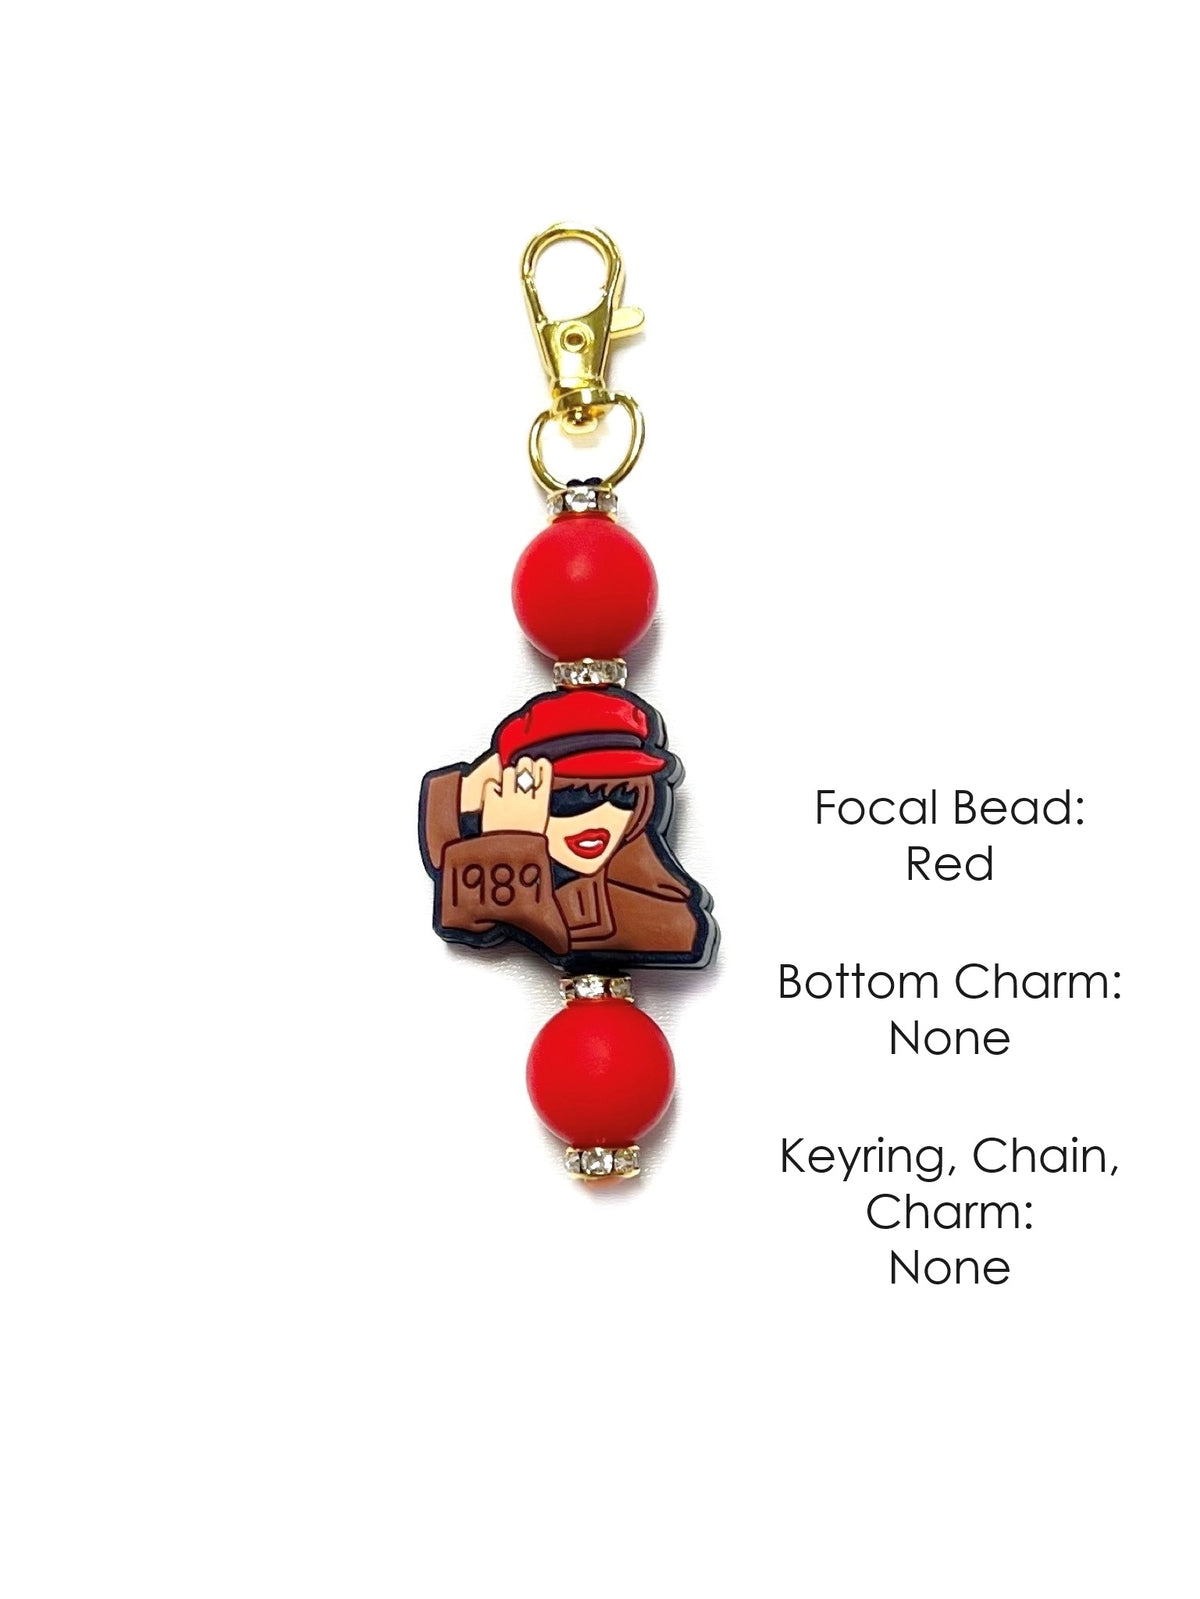 New Taylor Swift Accessory - keychain brown & red style with red hat and 1989 imprinted on jacket sleeve cuff